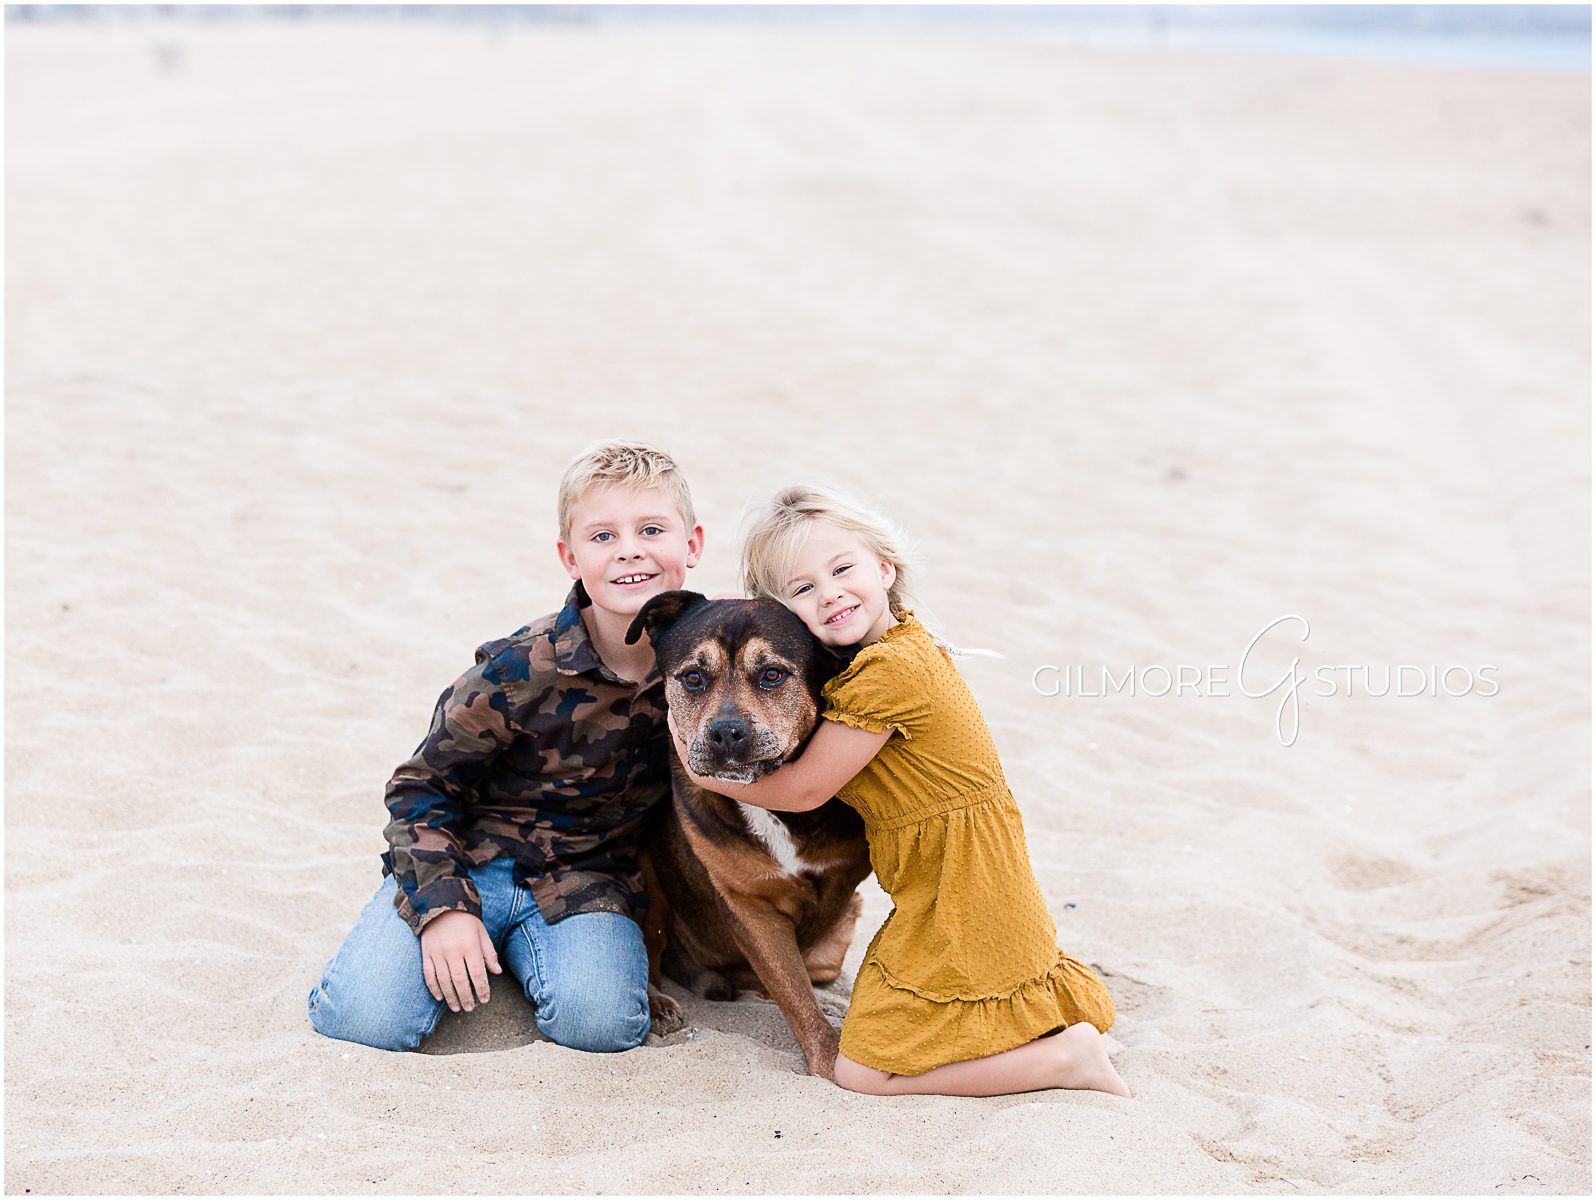 orange county family photographers, Family Photos at the Beach, family dog, kids portrait, brother, sister, family photo